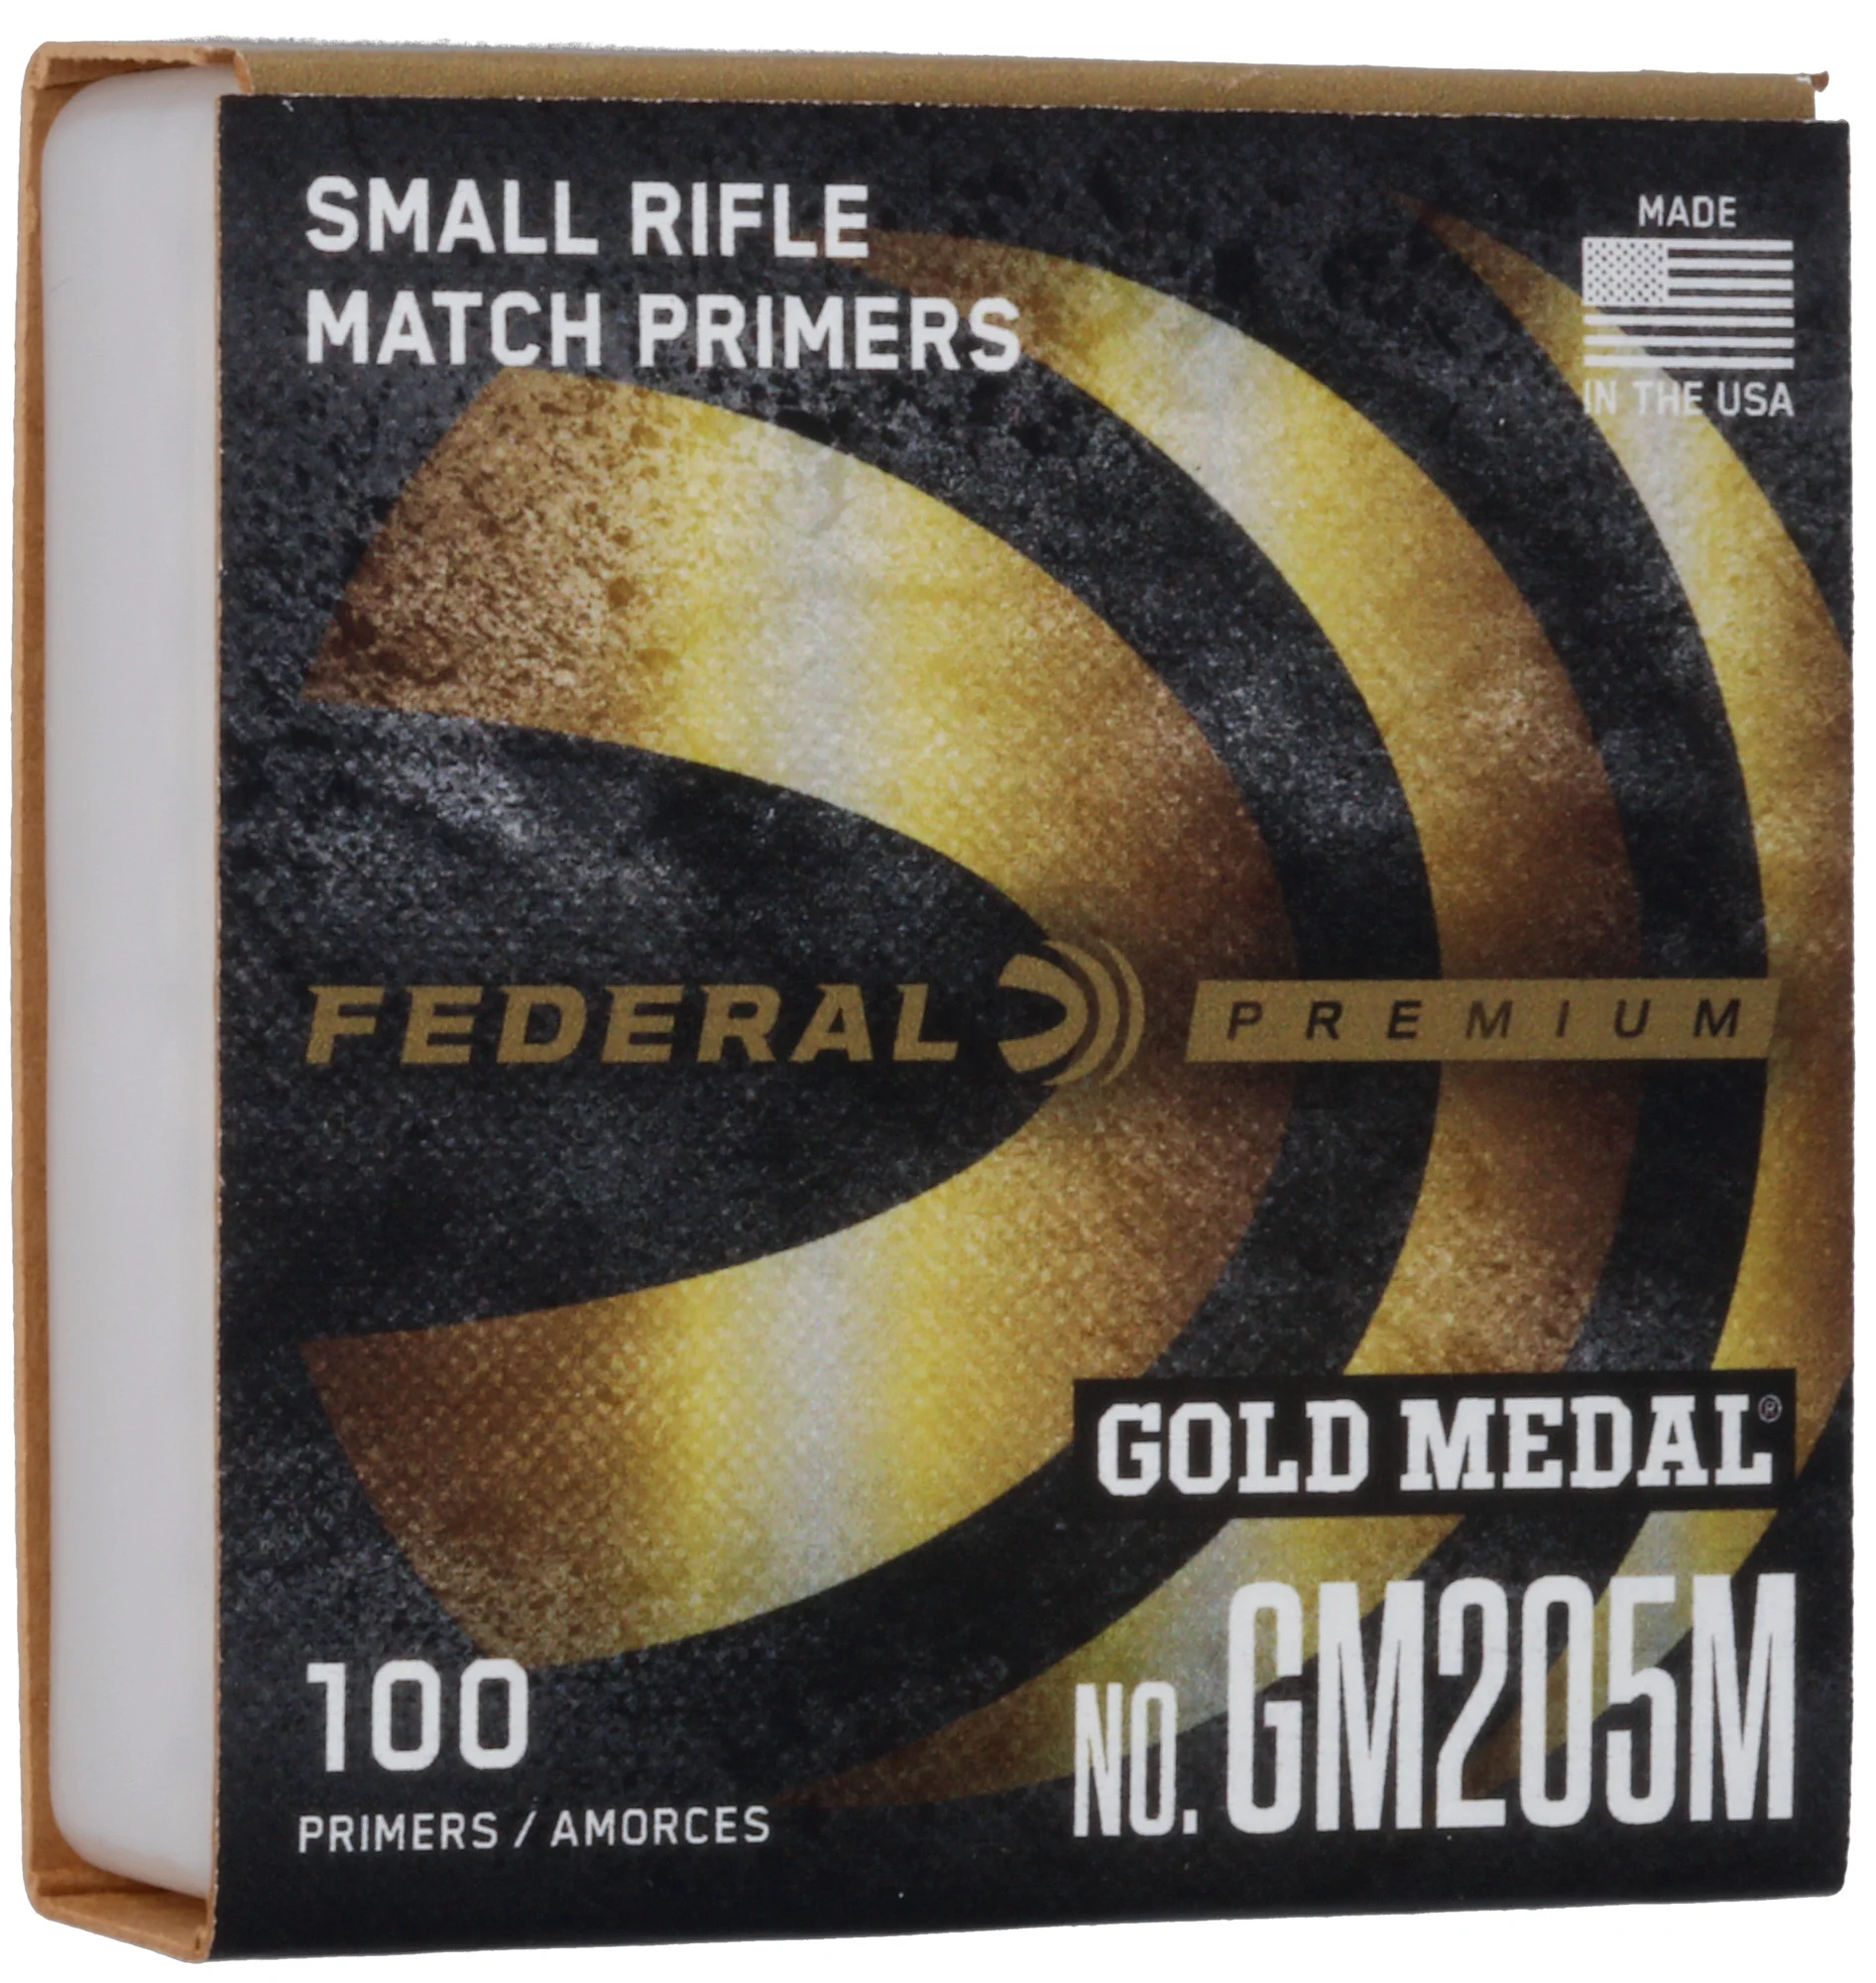 Federal GM205M Gold Medal Small Rifle Match Primers 